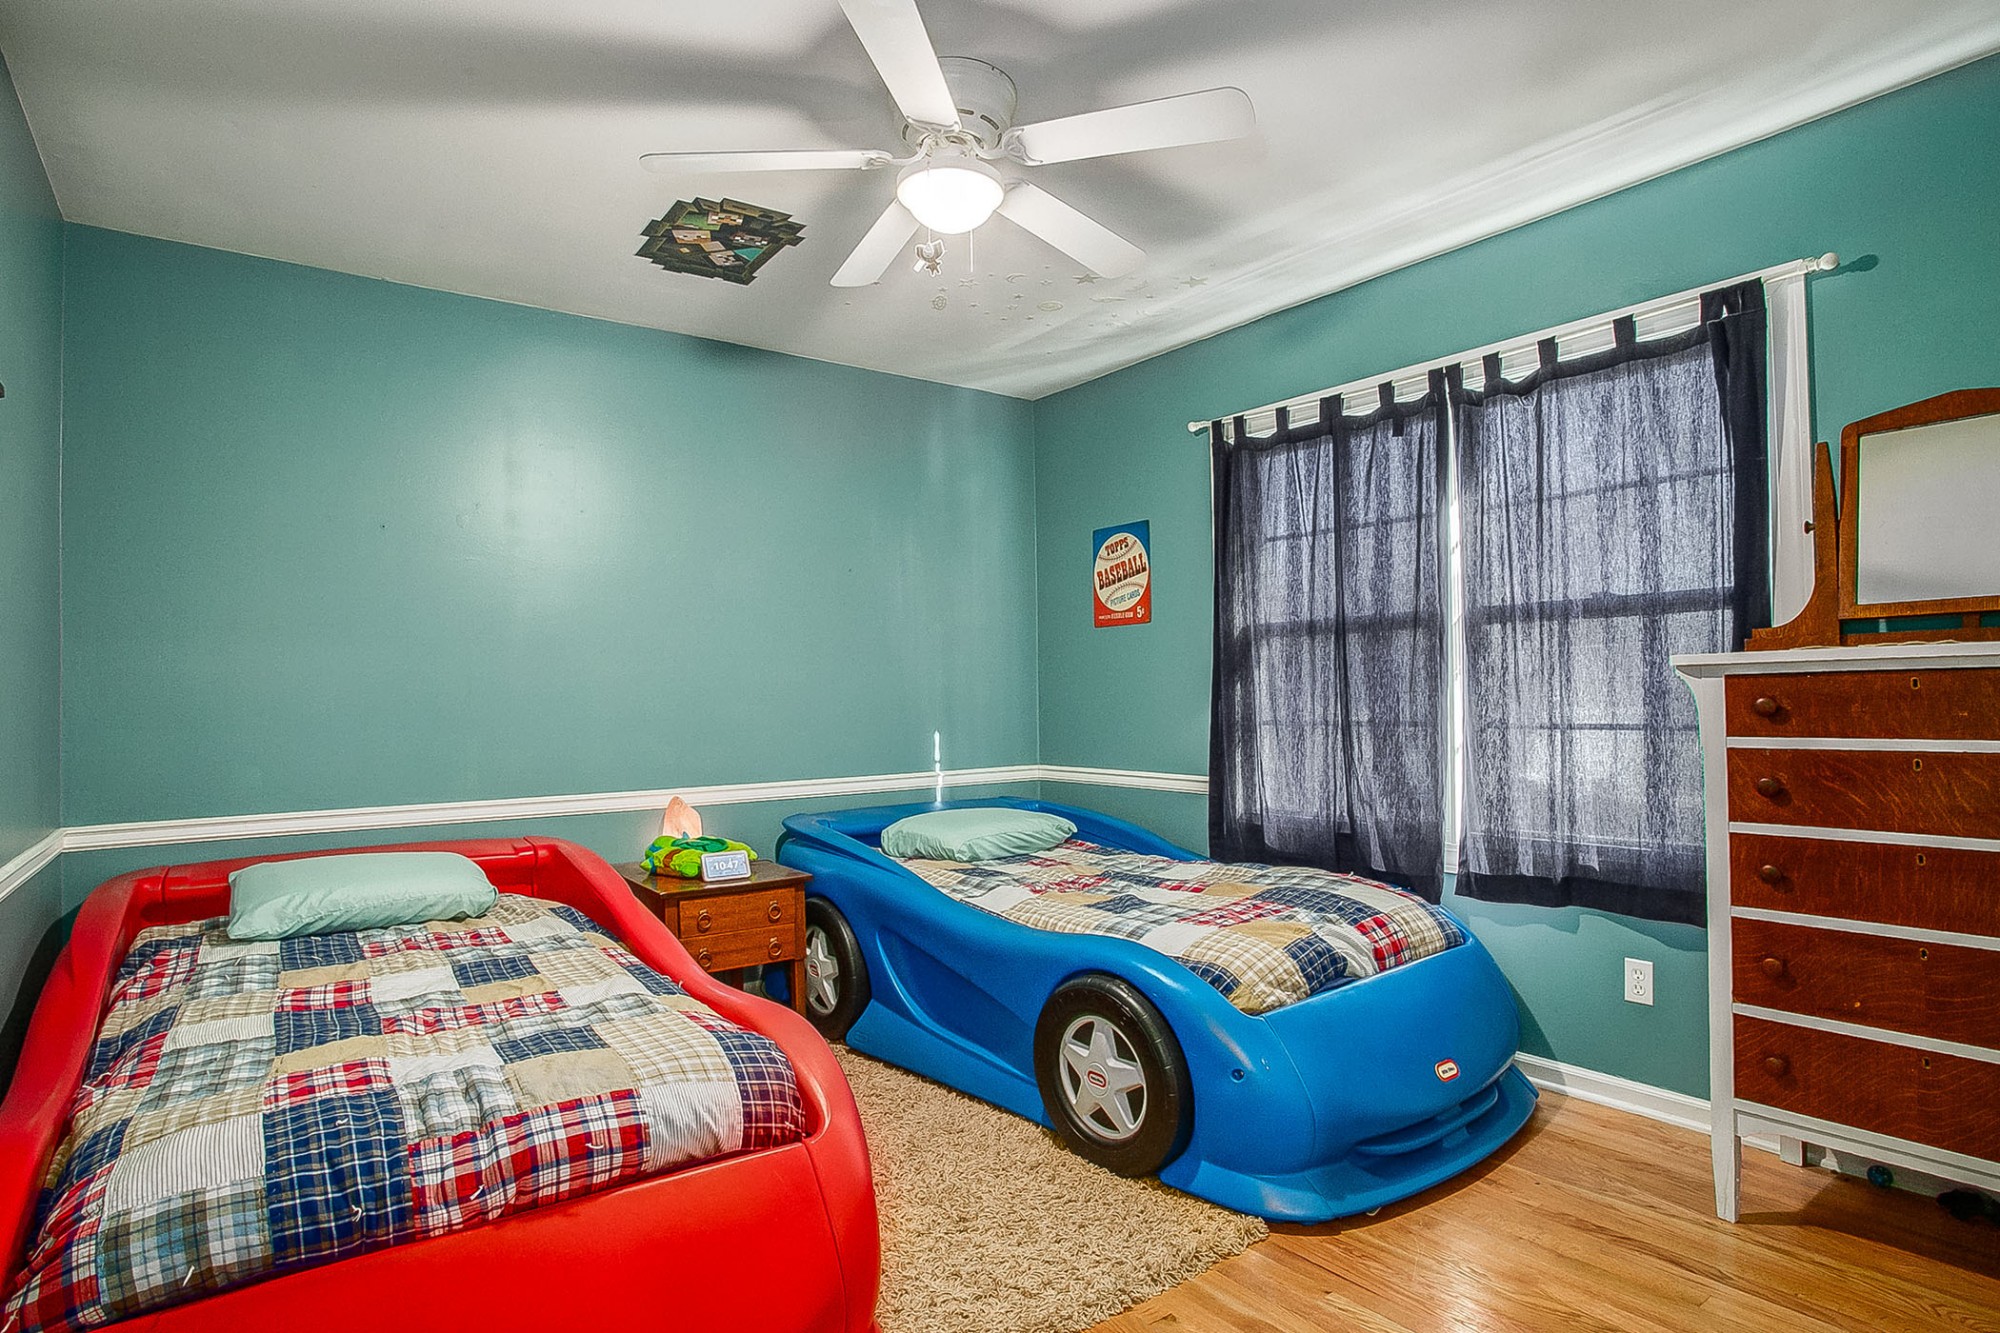 Secondary bedrooms feature hardwood floors, lighted ceiling fans, and walk-in closets.